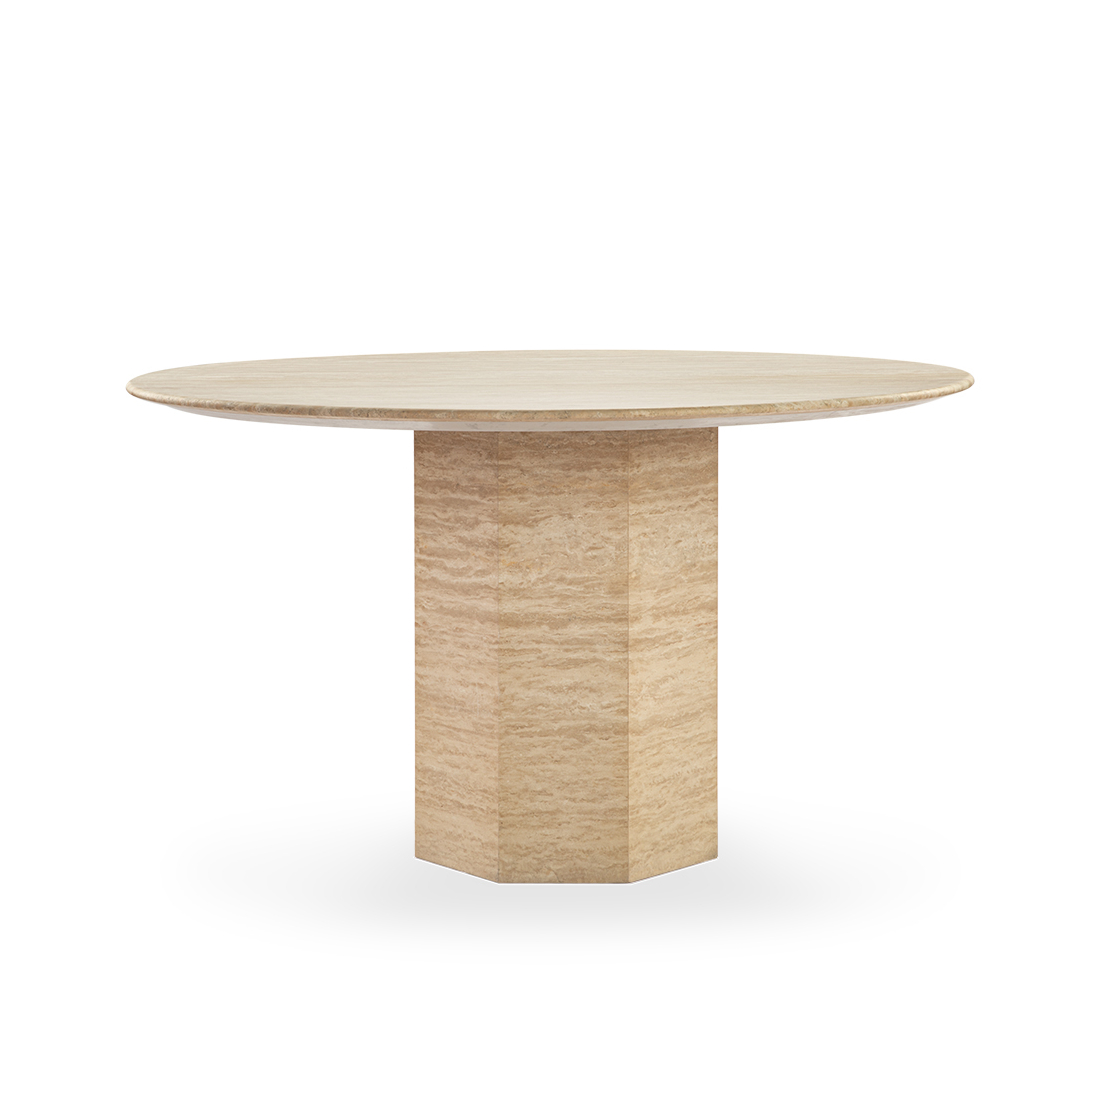 Picco Round Beige Travertine Dining Table with Hexagon Base
